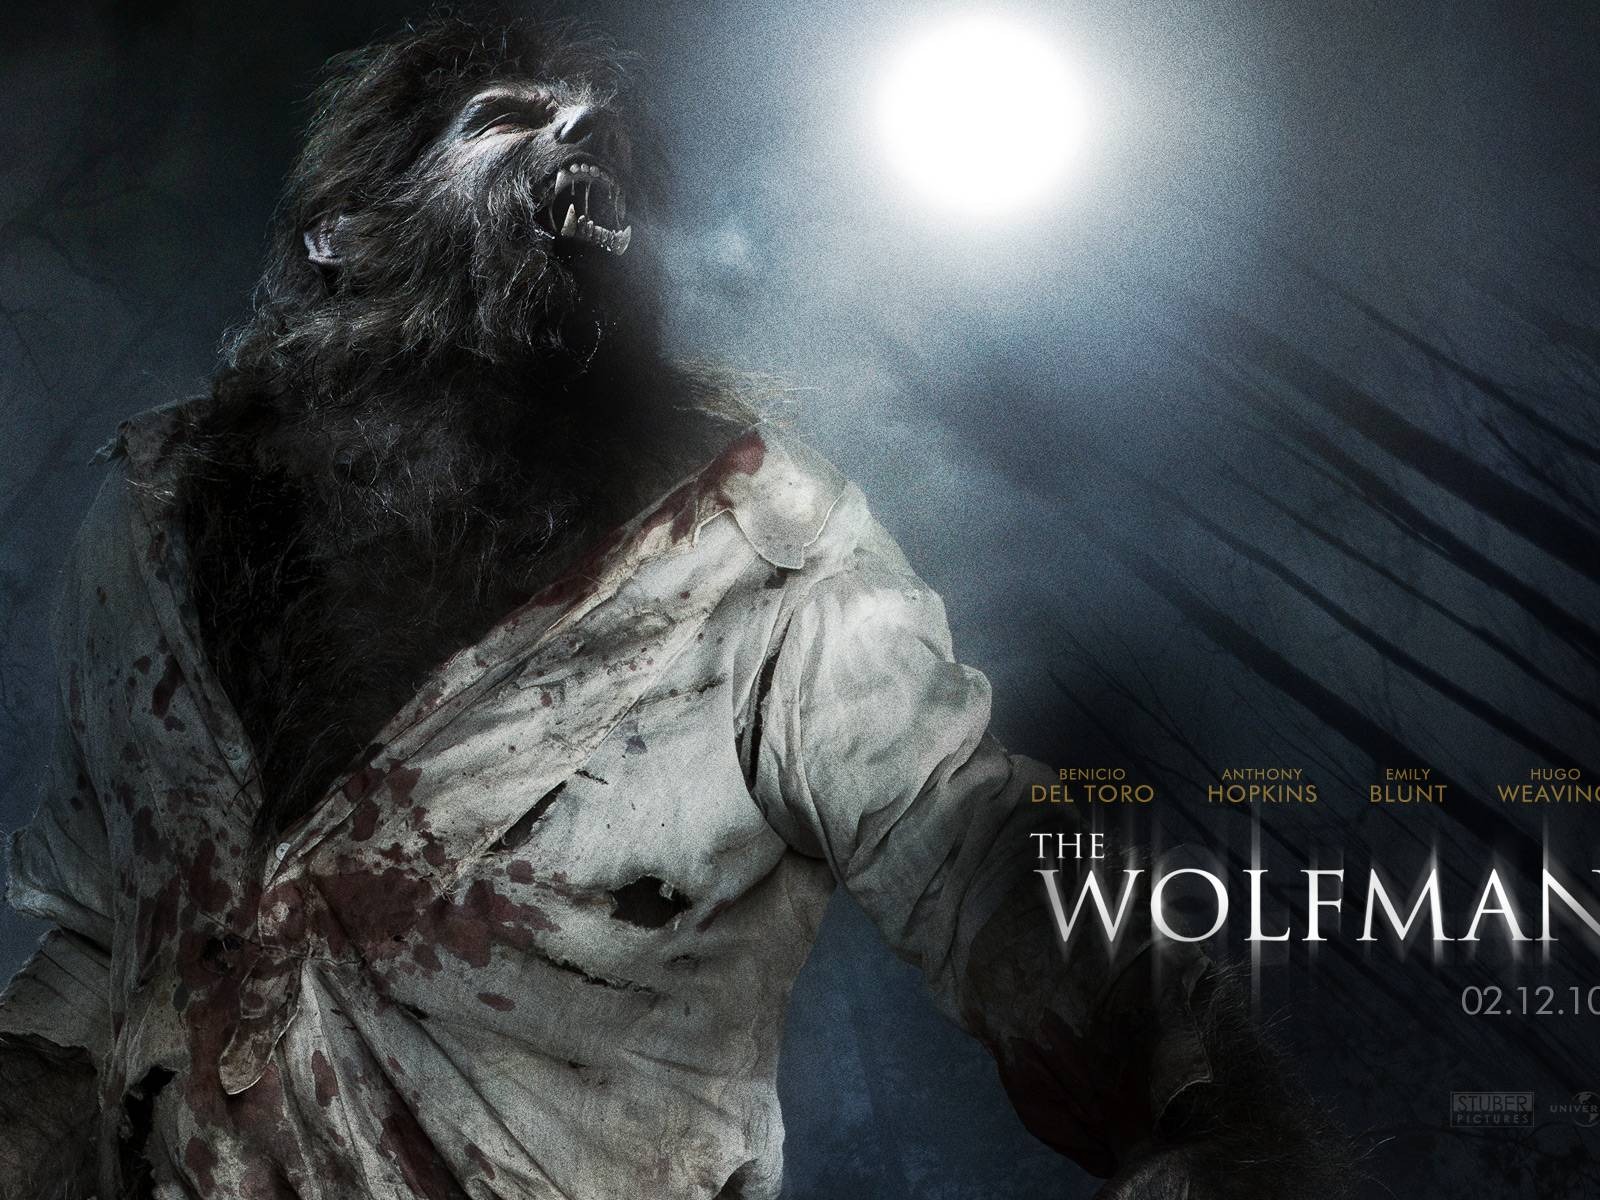 The Wolfman Movie Wallpapers #3 - 1600x1200